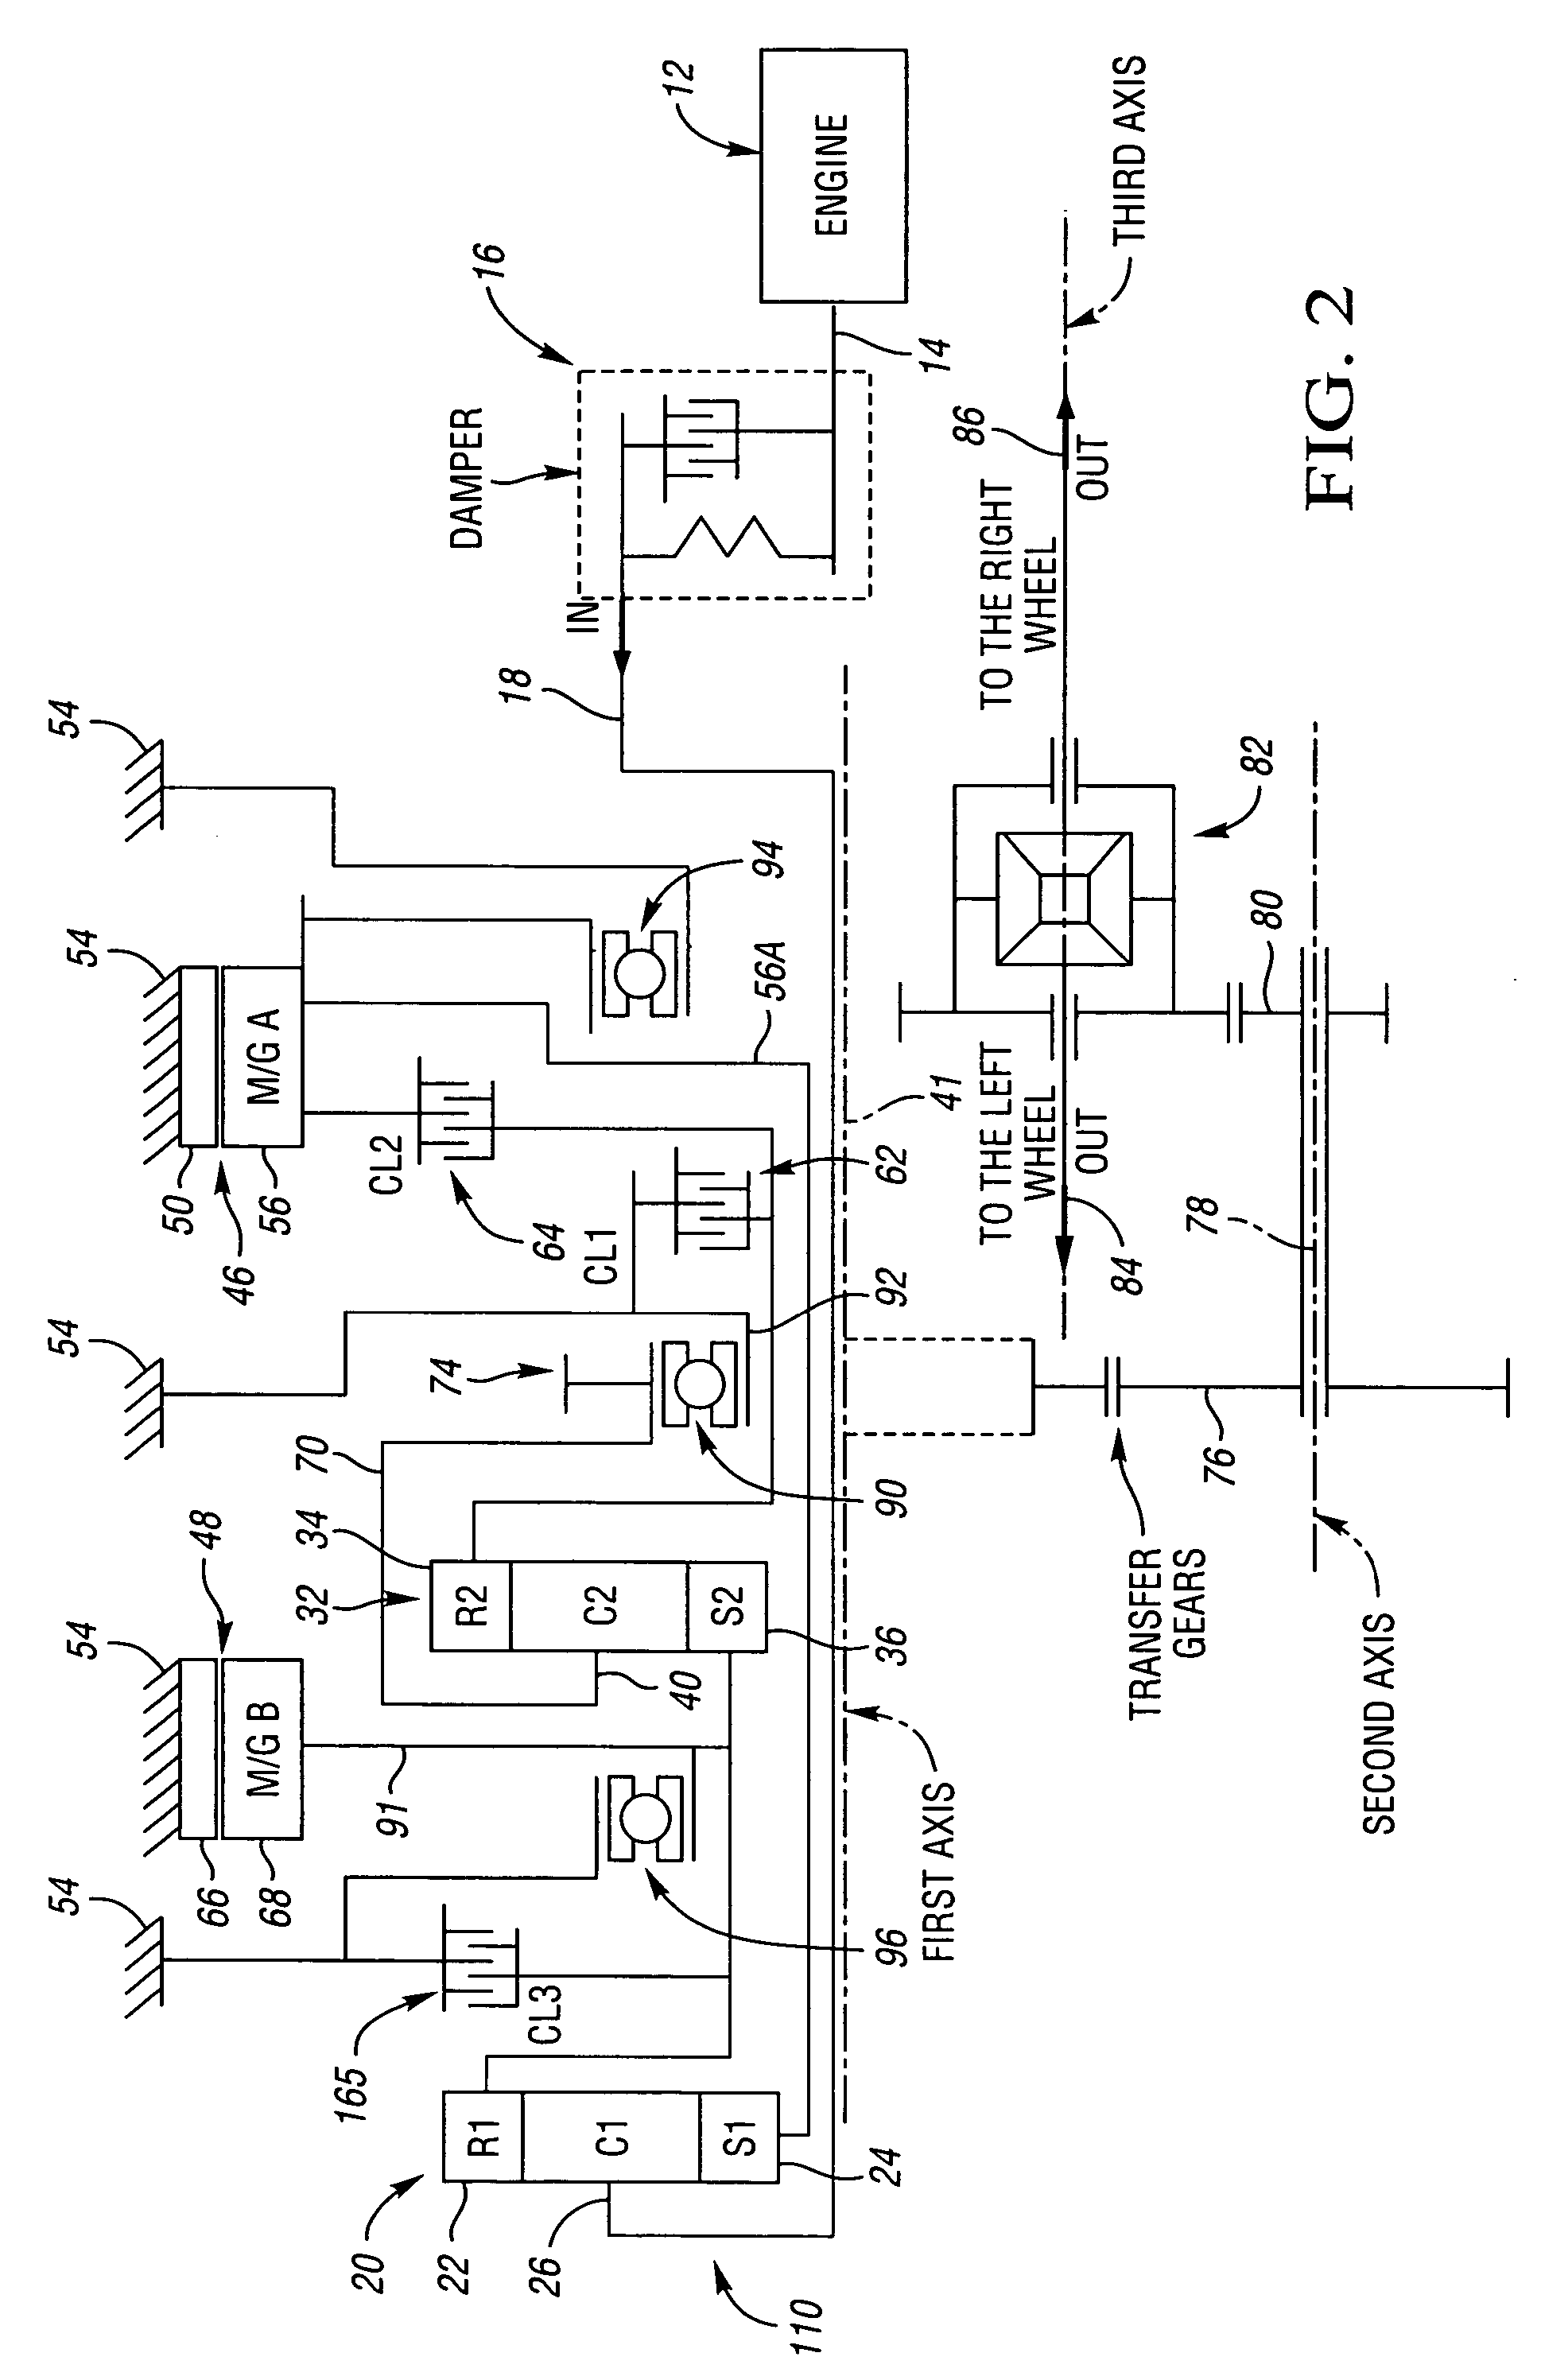 Electrically variable transmission arrangement with transfer gear between gear sets and clutches